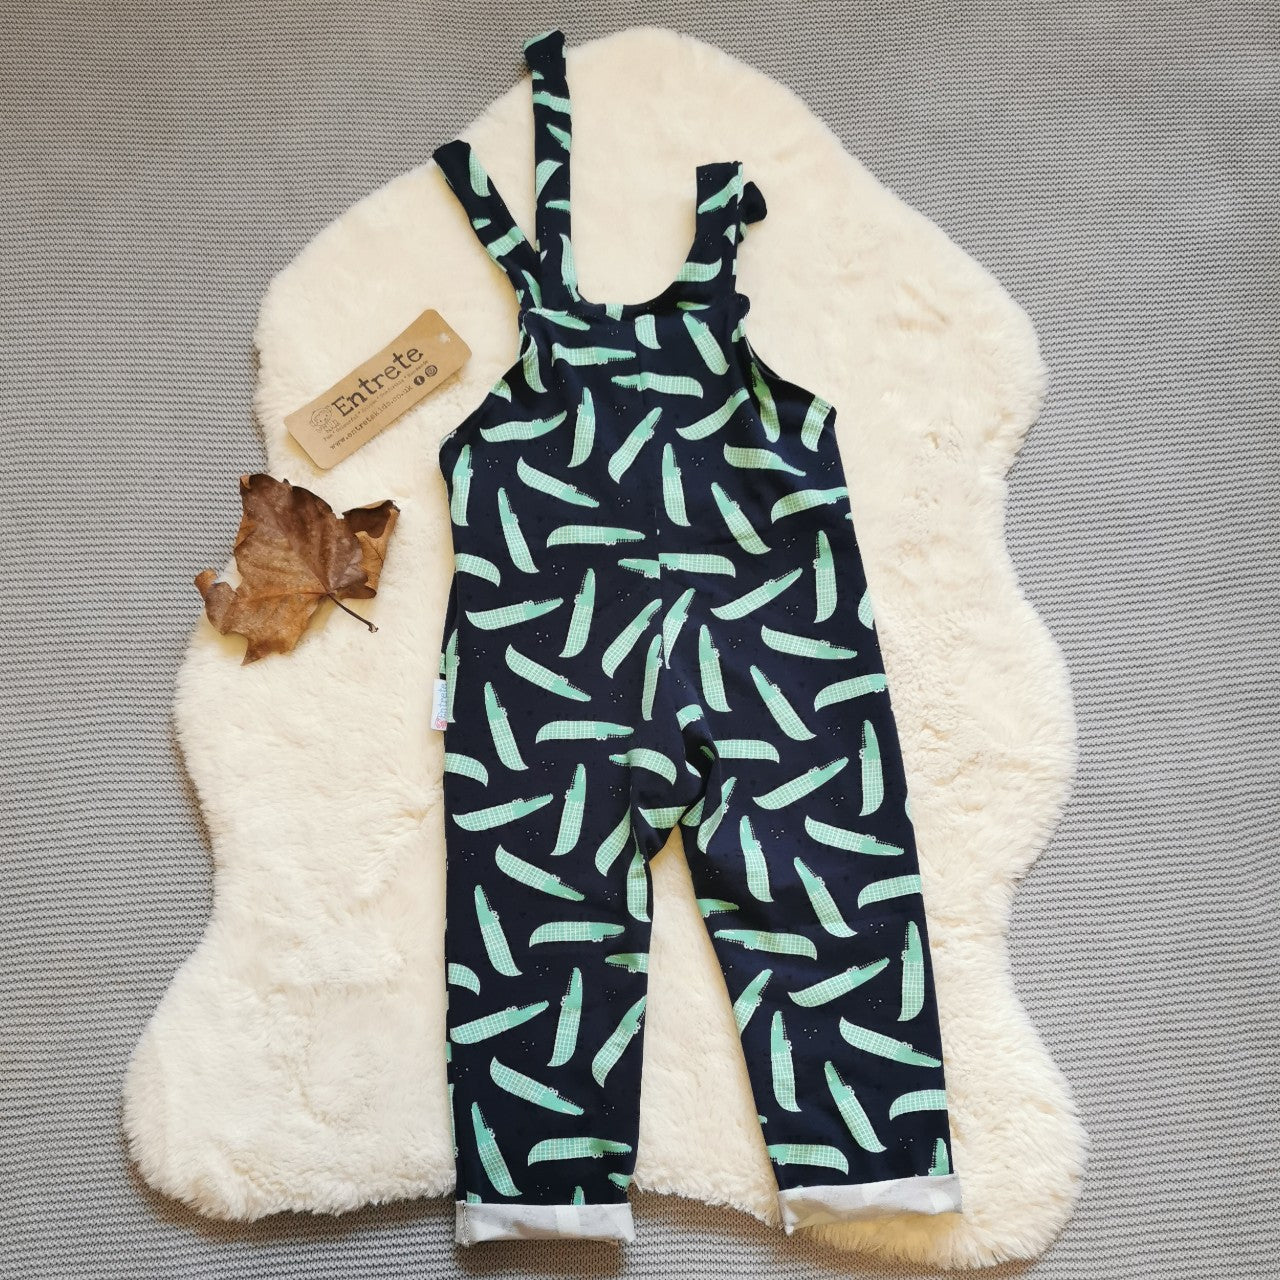 Rear of the amazingly fun navy crocodiles tie strap dungarees, handmade using navy crocodiles cotton jersey. Featuring a front pocket, rolled ankles and adjustable tie straps.